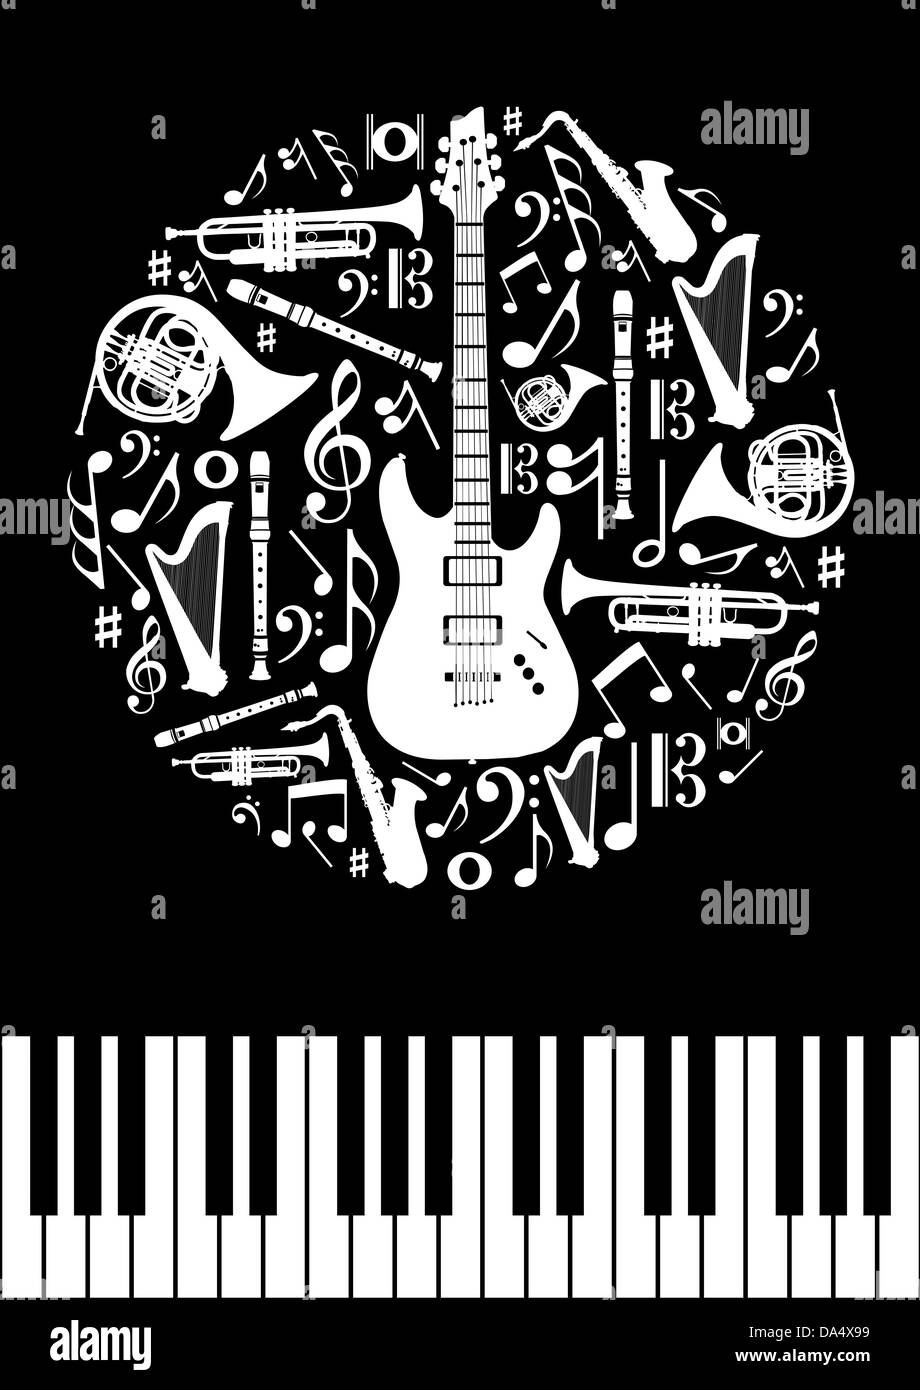 Music concept circle shape with instrument silhouettes in black background. Vector illustration layered for easy manipulation and custom coloring. Stock Photo